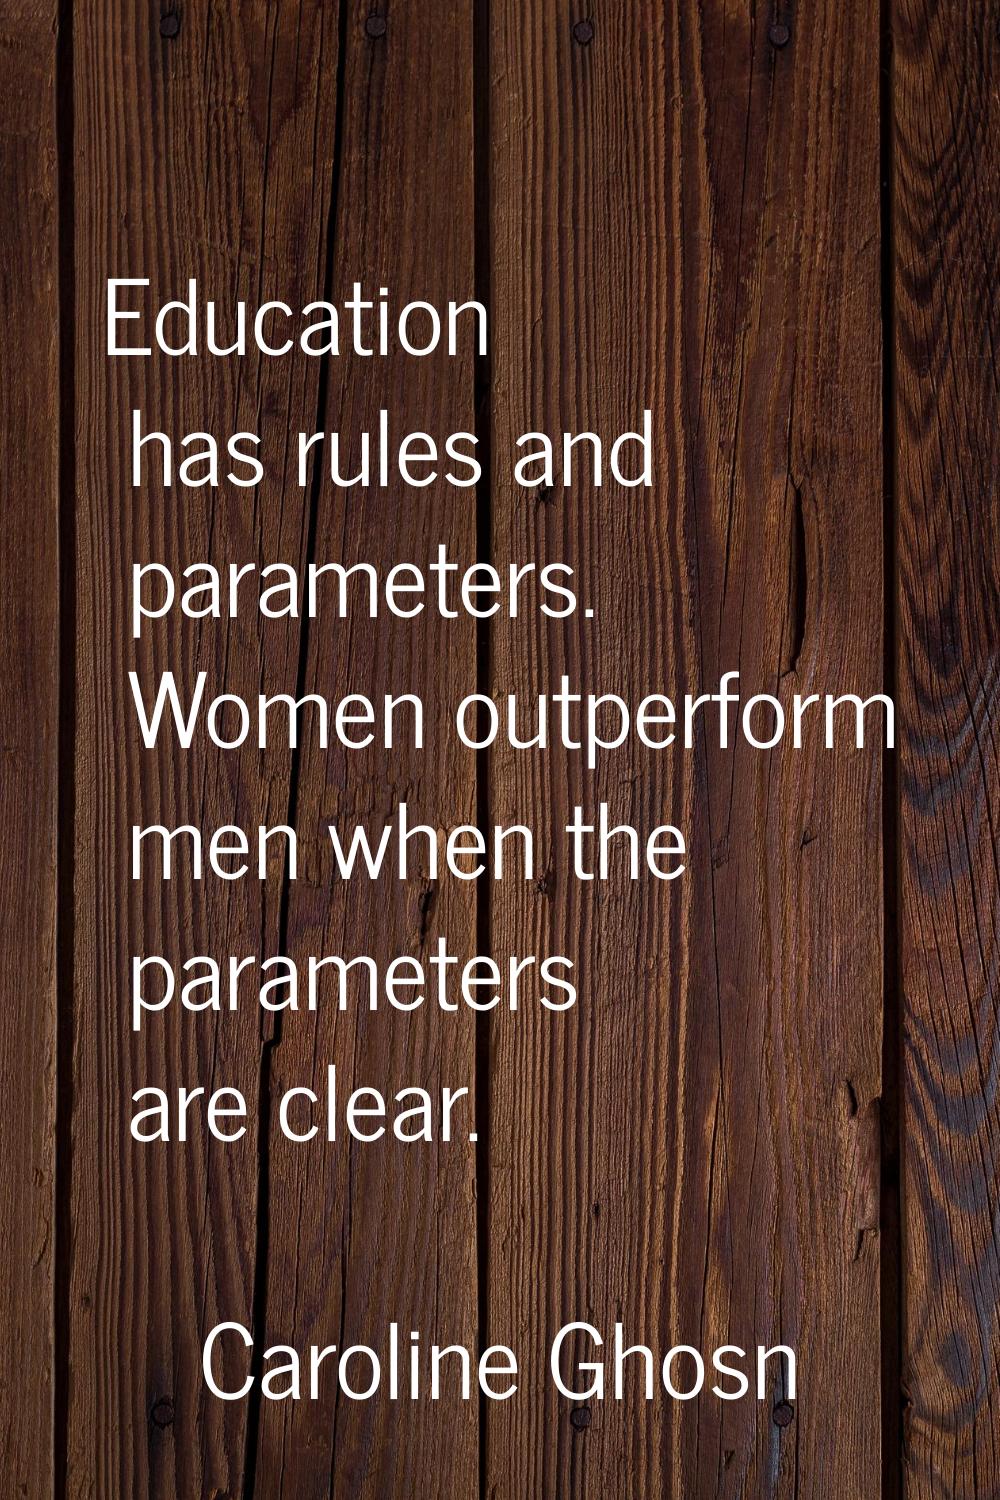 Education has rules and parameters. Women outperform men when the parameters are clear.